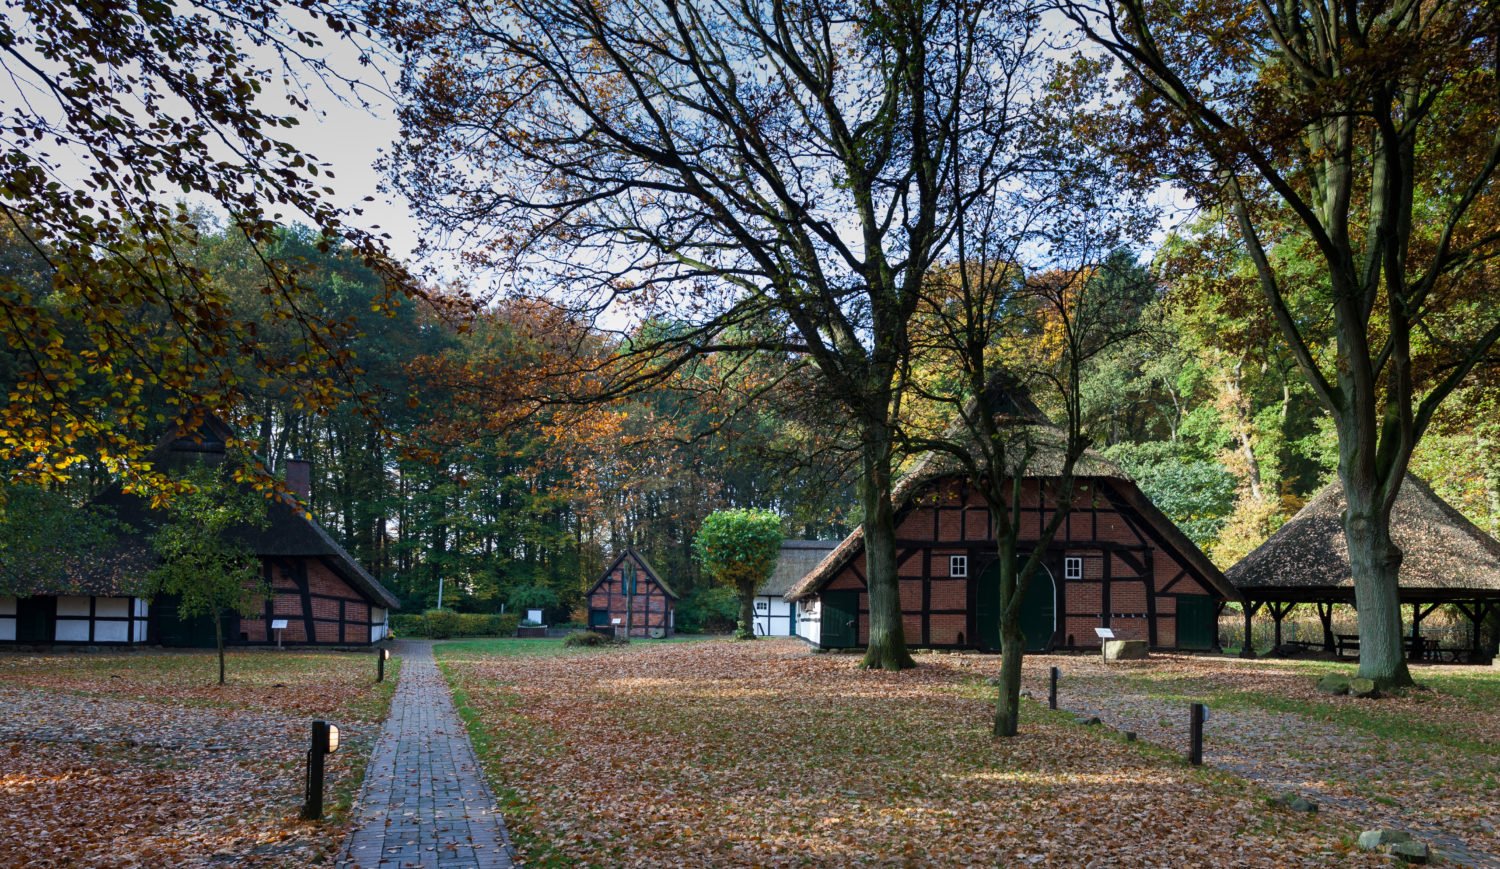 Walking through the open-air museum, you can relive the rural life of past centuries